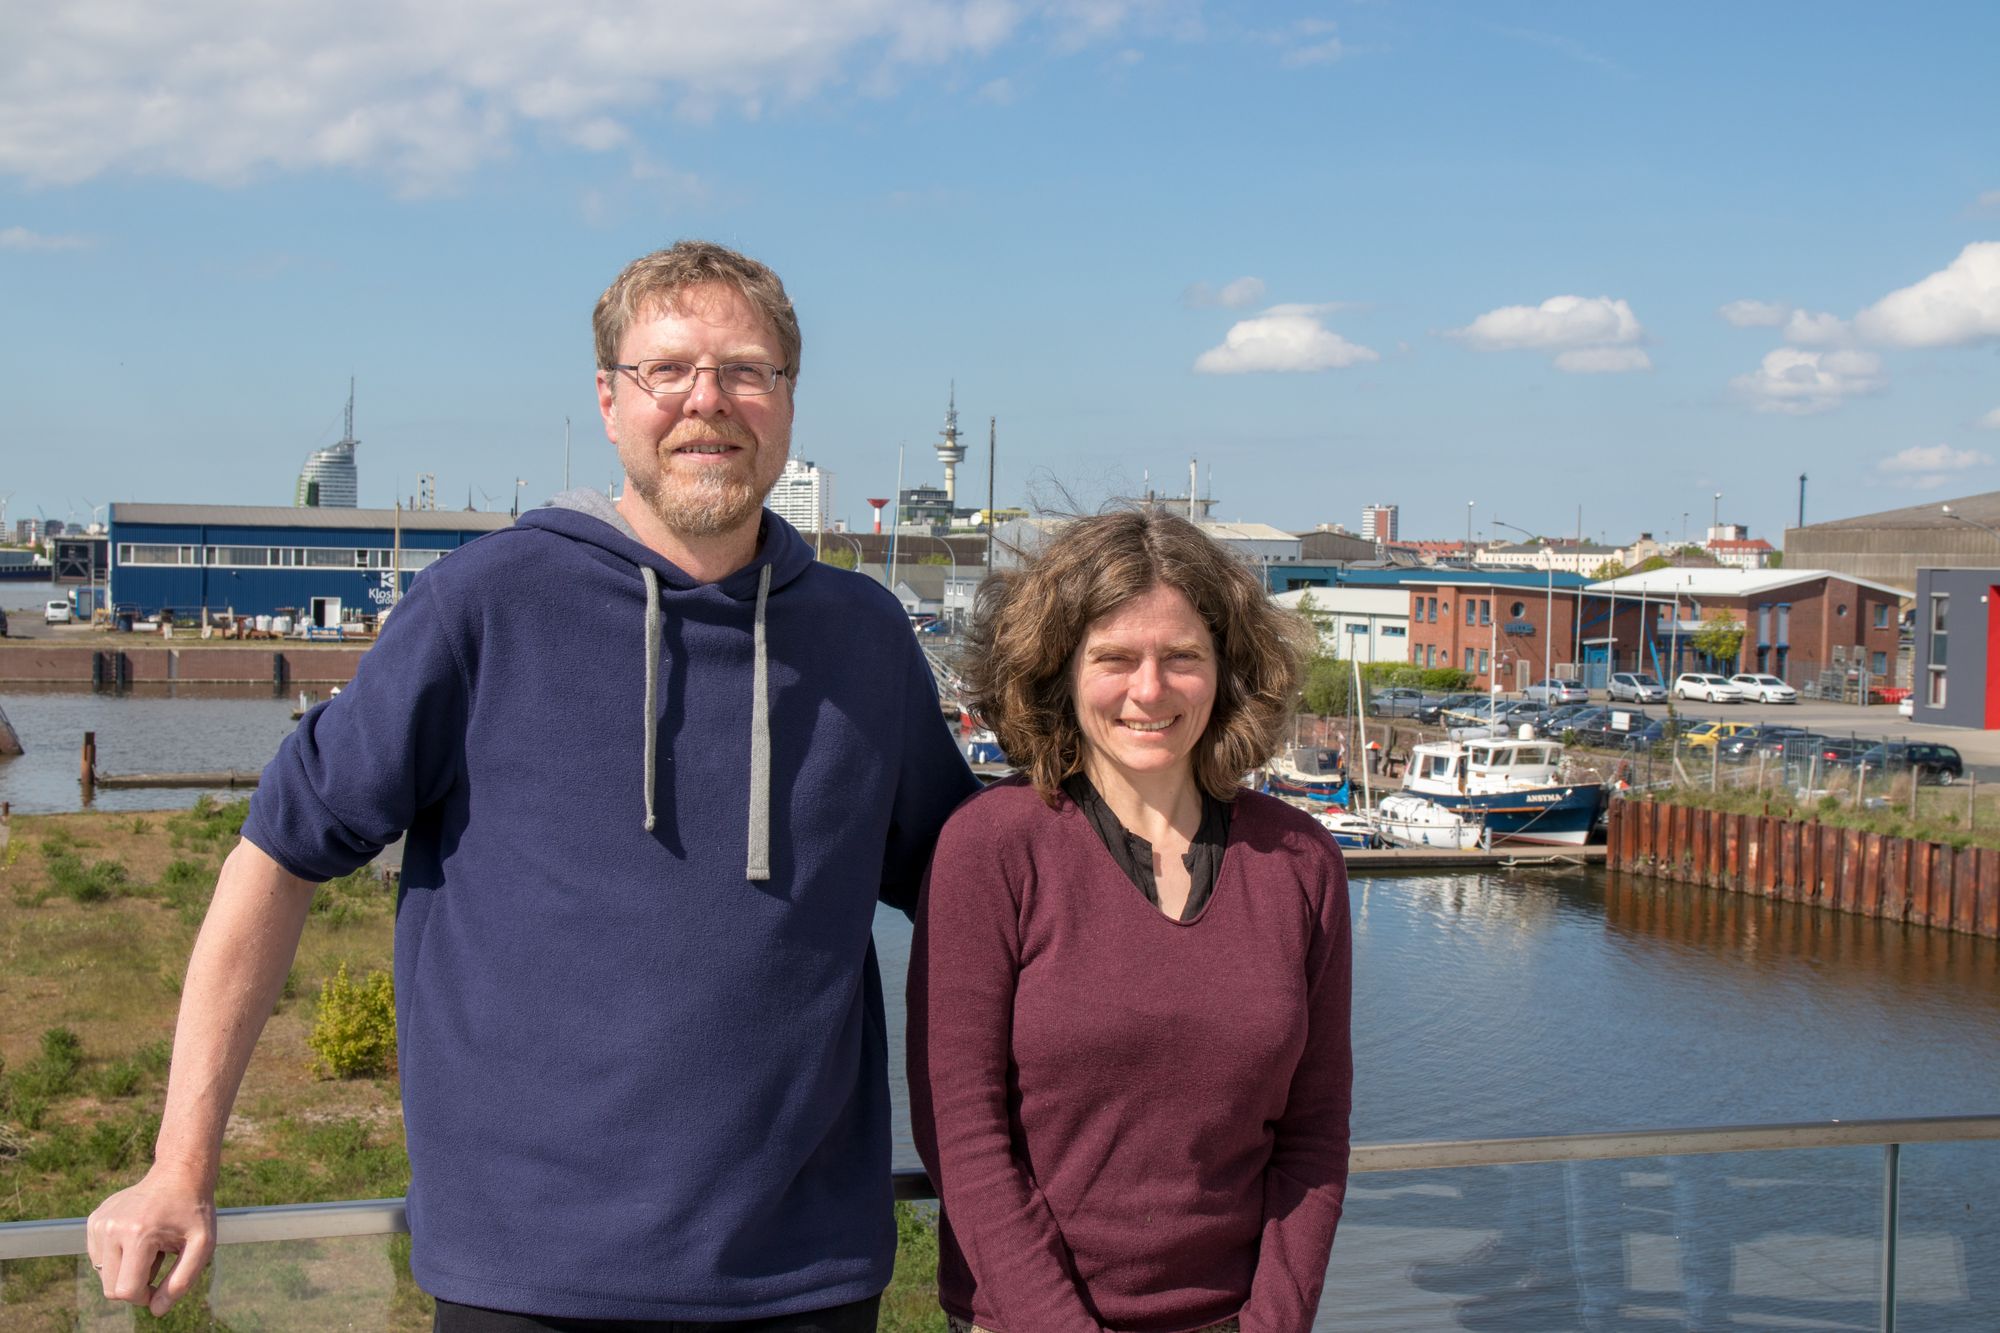 Leader and a colleague of workpackage 3 in front of Bremerhaven harbour